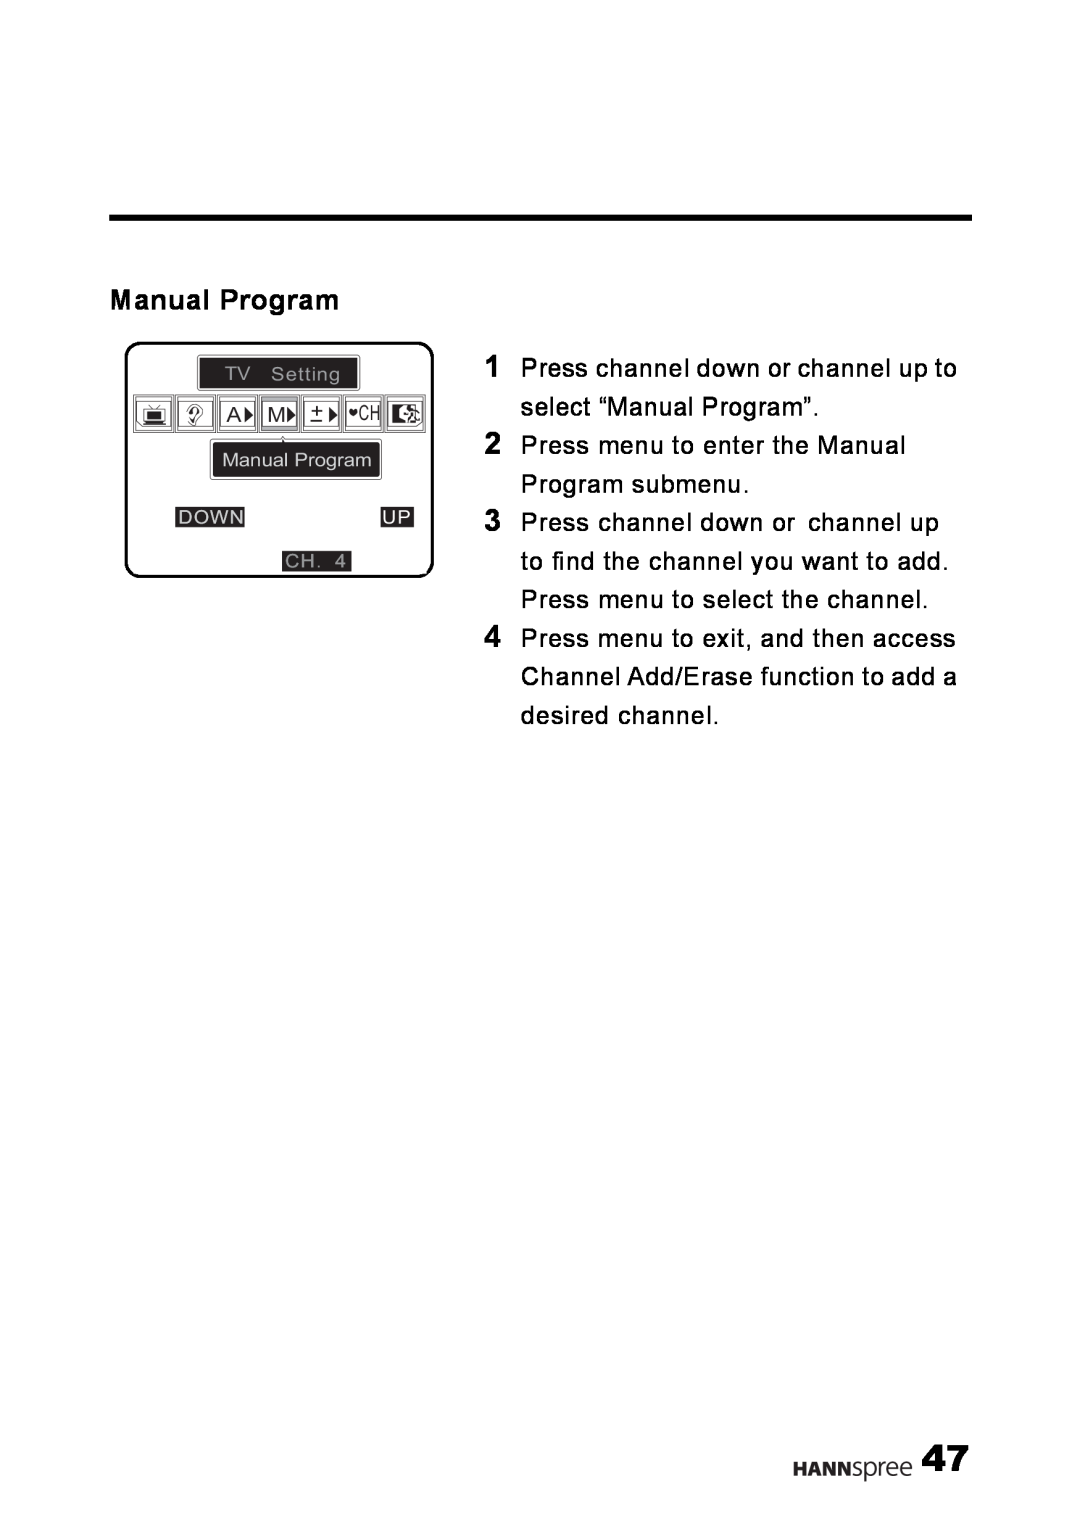 HANNspree LT09-10U1-000 user manual Press channel down or channel up to select “Manual Program”, TV Setting, Downup 